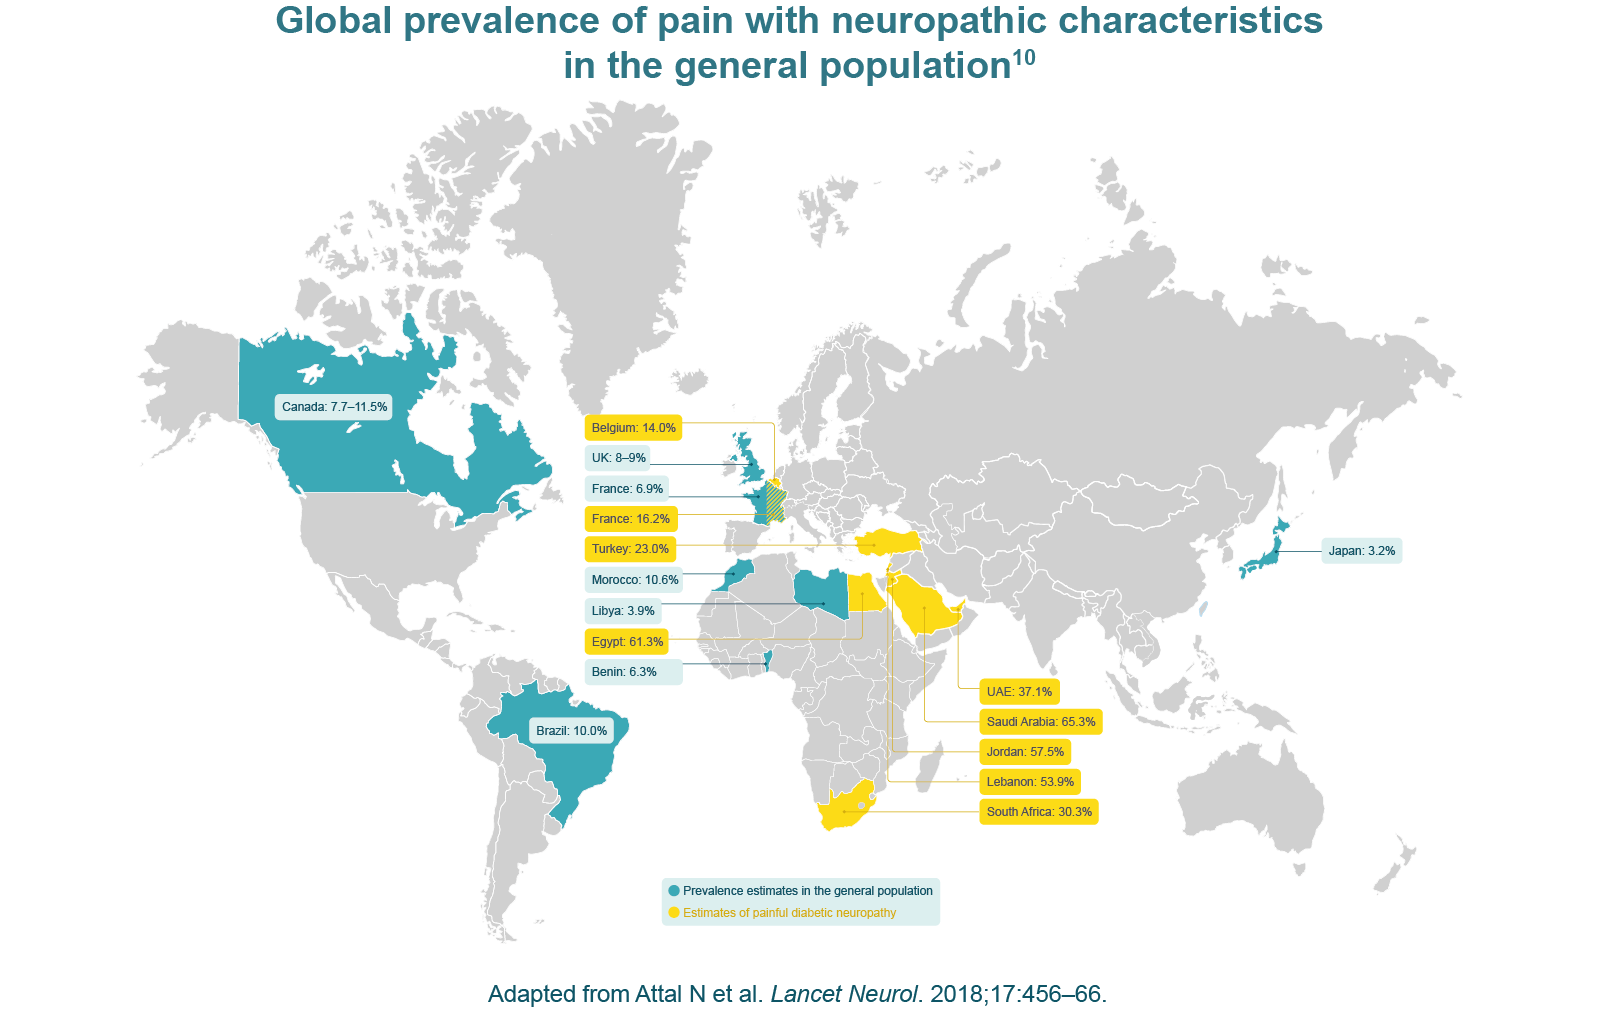 Global prevalence of pain with neuropathic characteristics in the general population